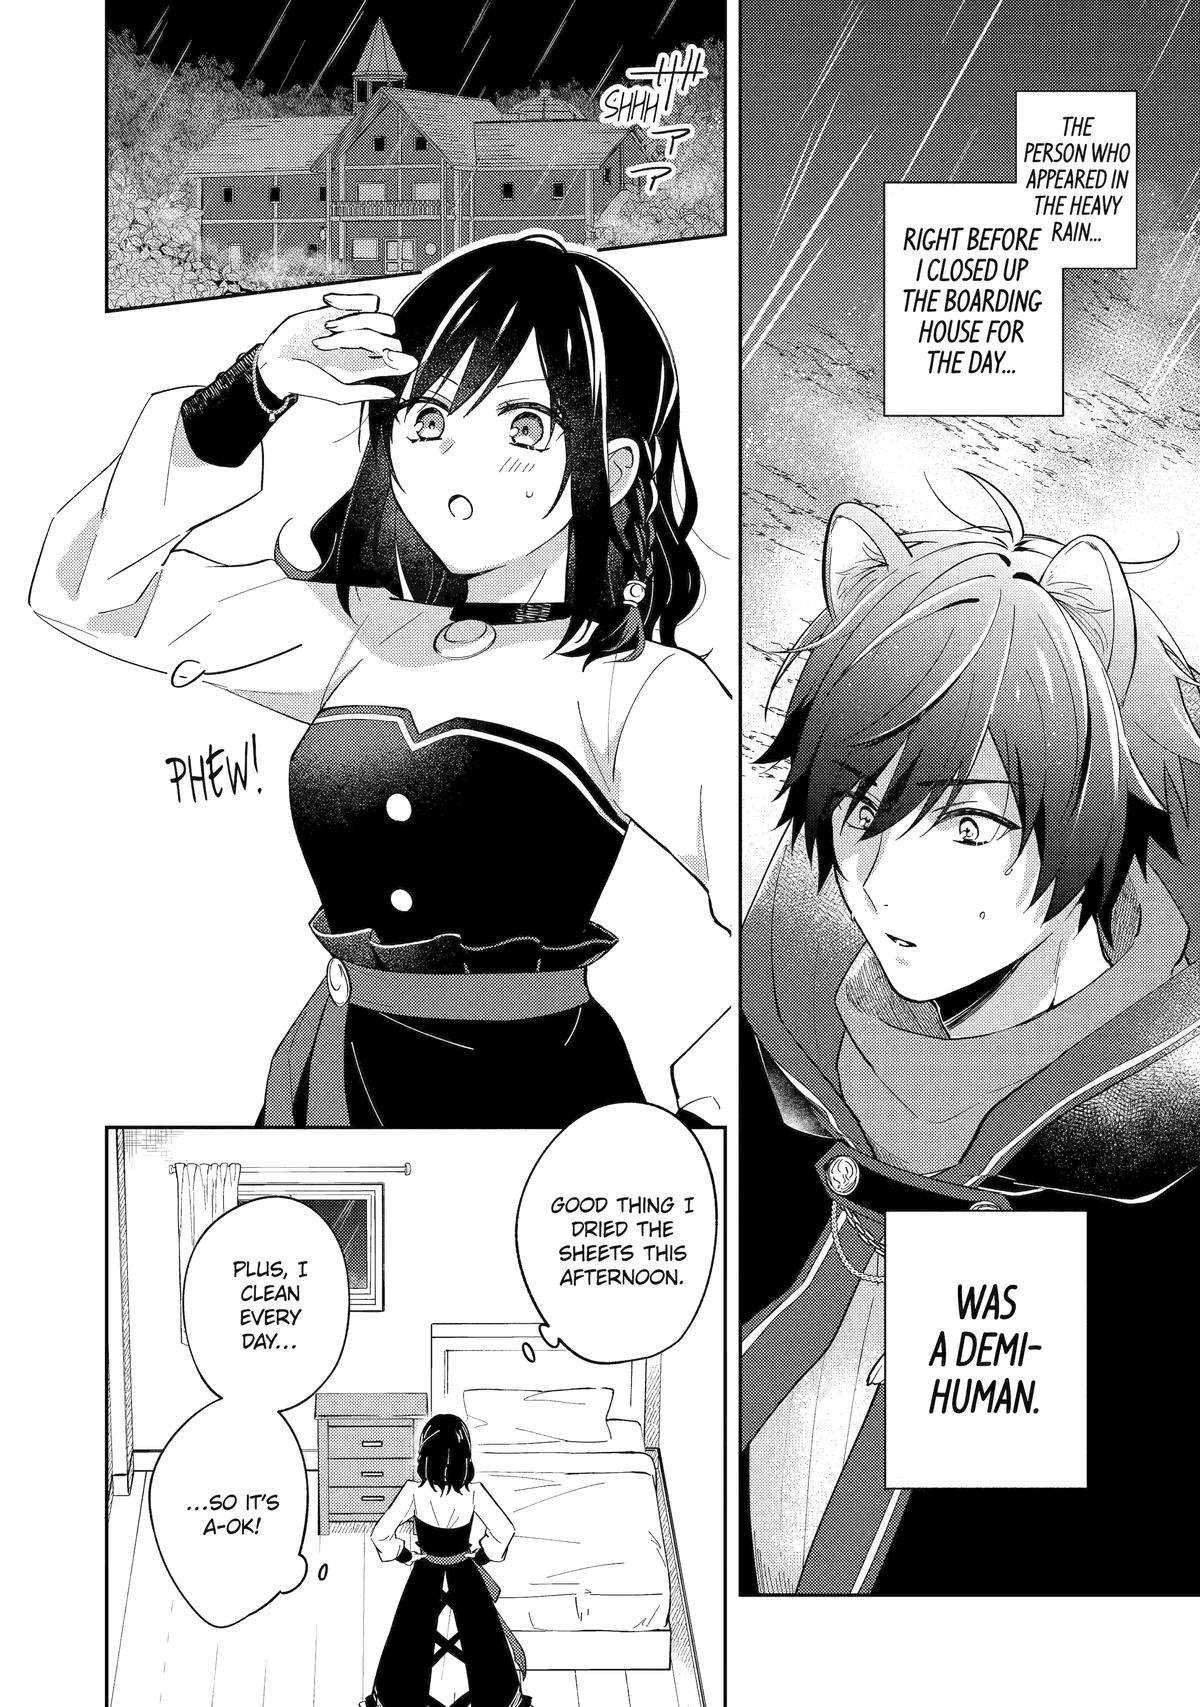 The Black Witch Runs Her Own Boarding House in Another World - chapter 2 - #2